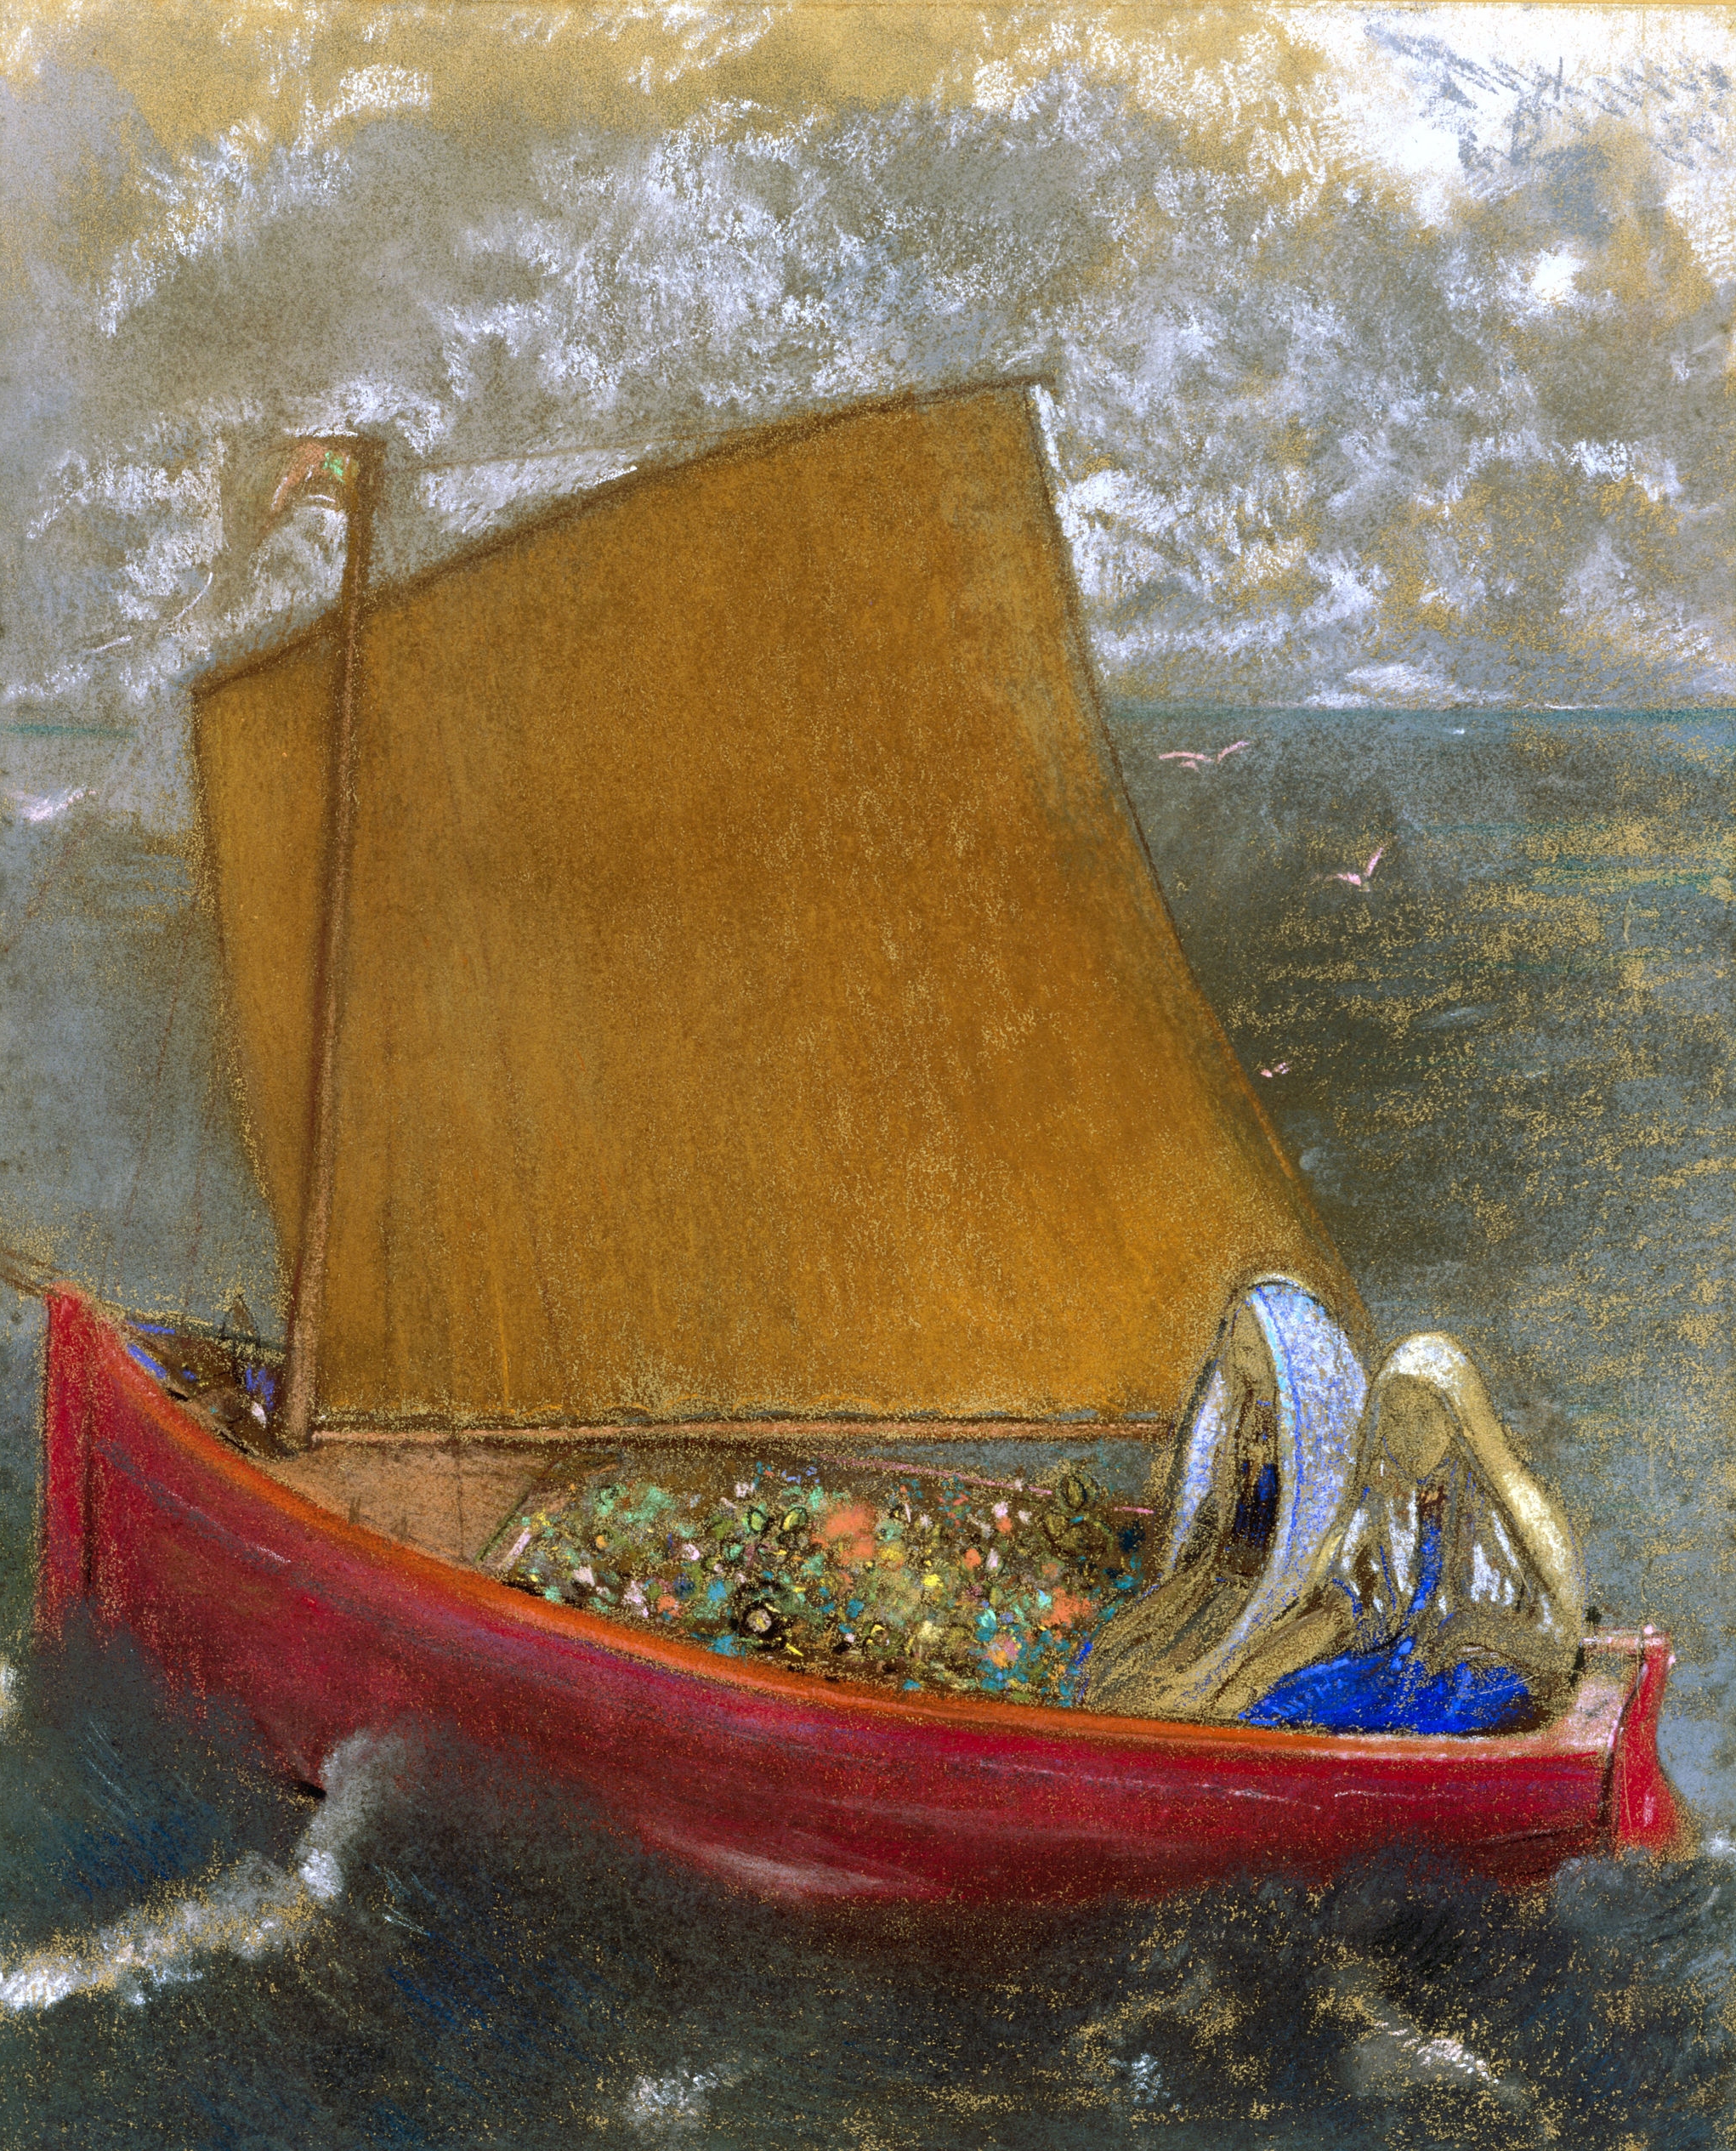 The Yellow Sail by Odilon Redon - 1905 - 23x 18 1/2 in. Indianapolis Museum of Art